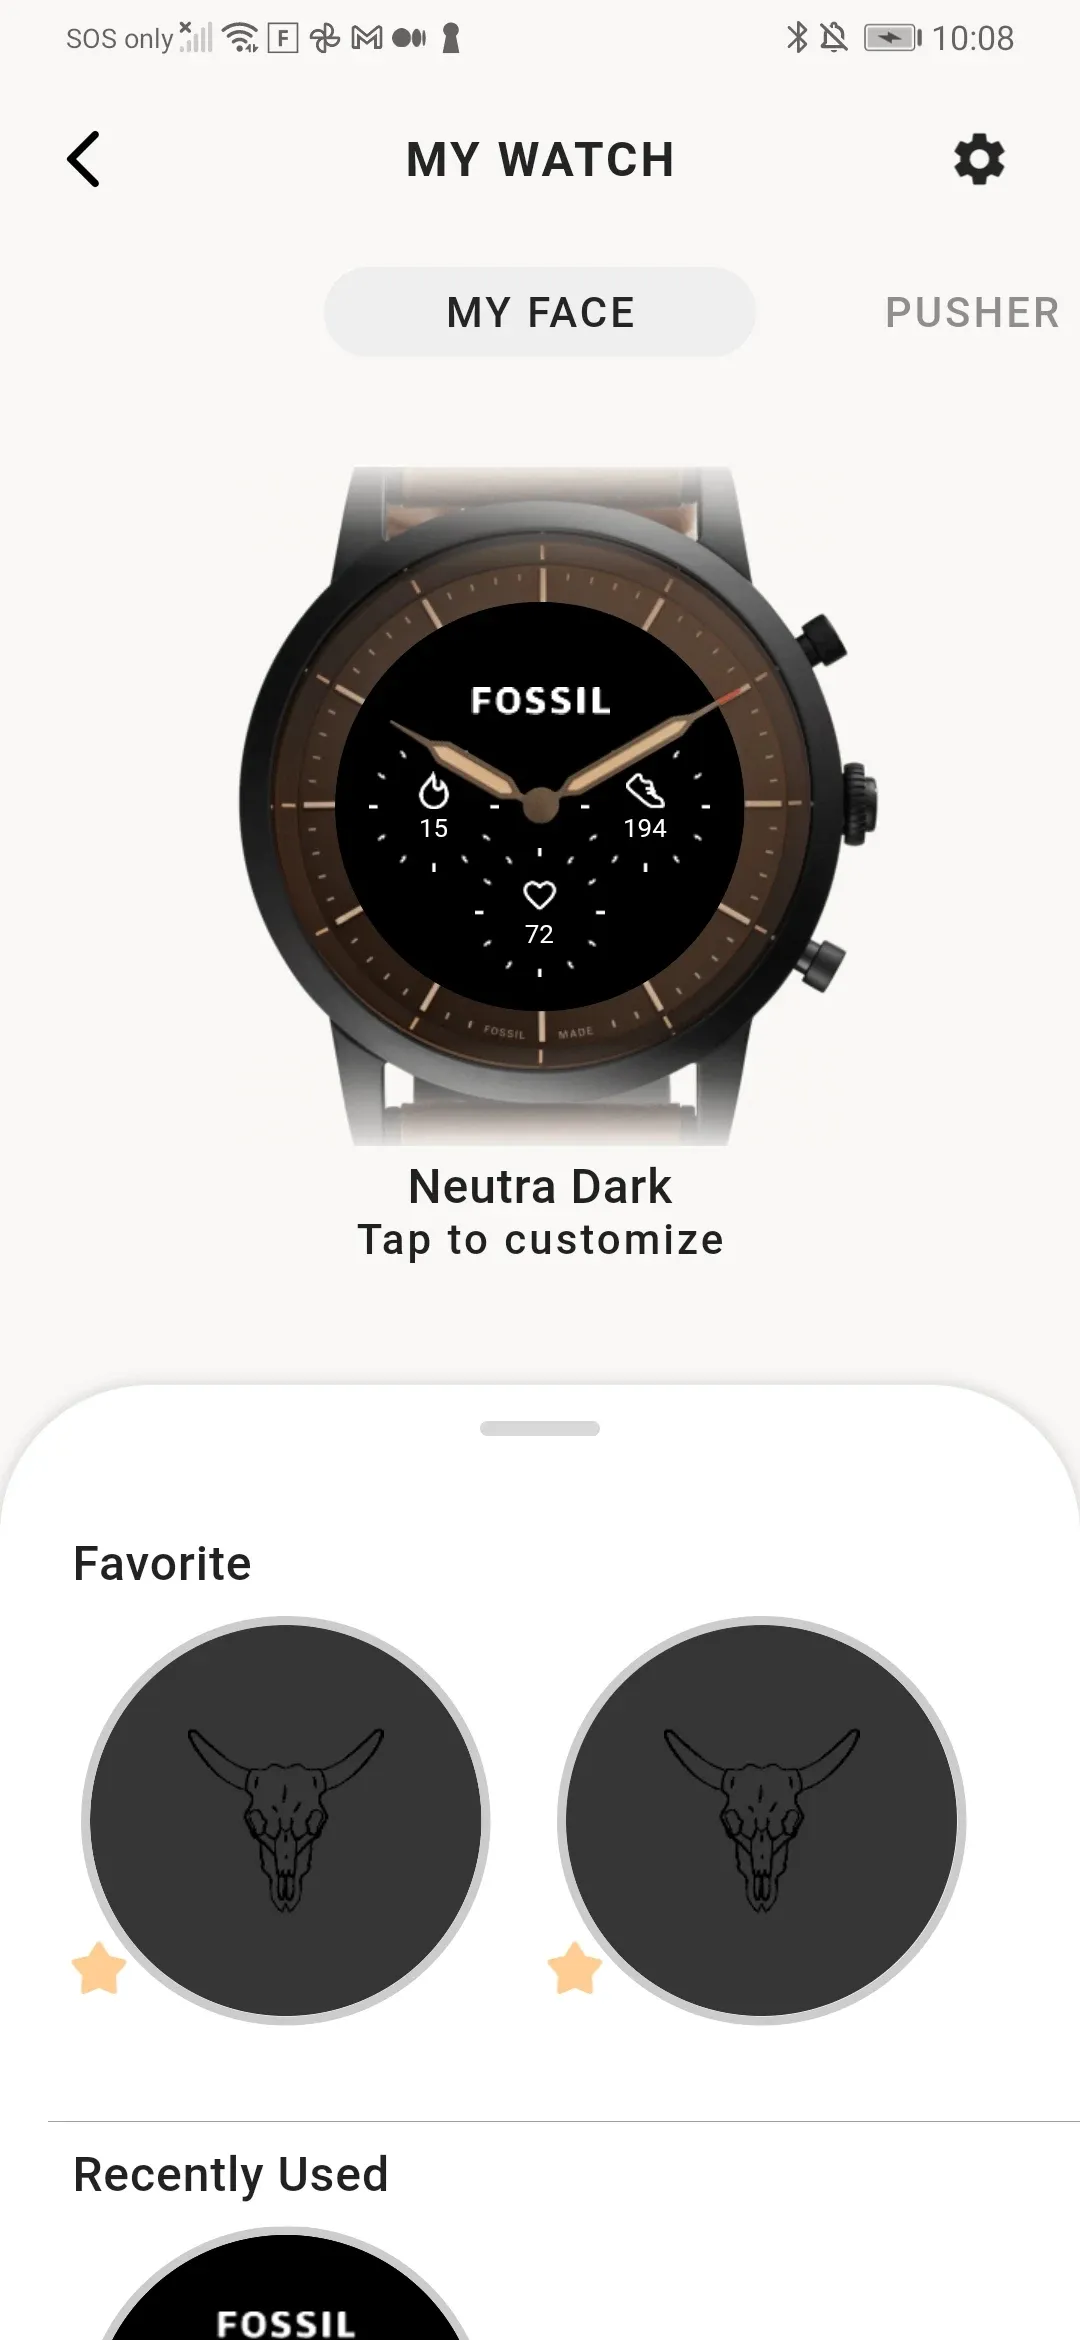 Fossil's first Wear OS 3 smartwatch is a mild refresh of last year's model